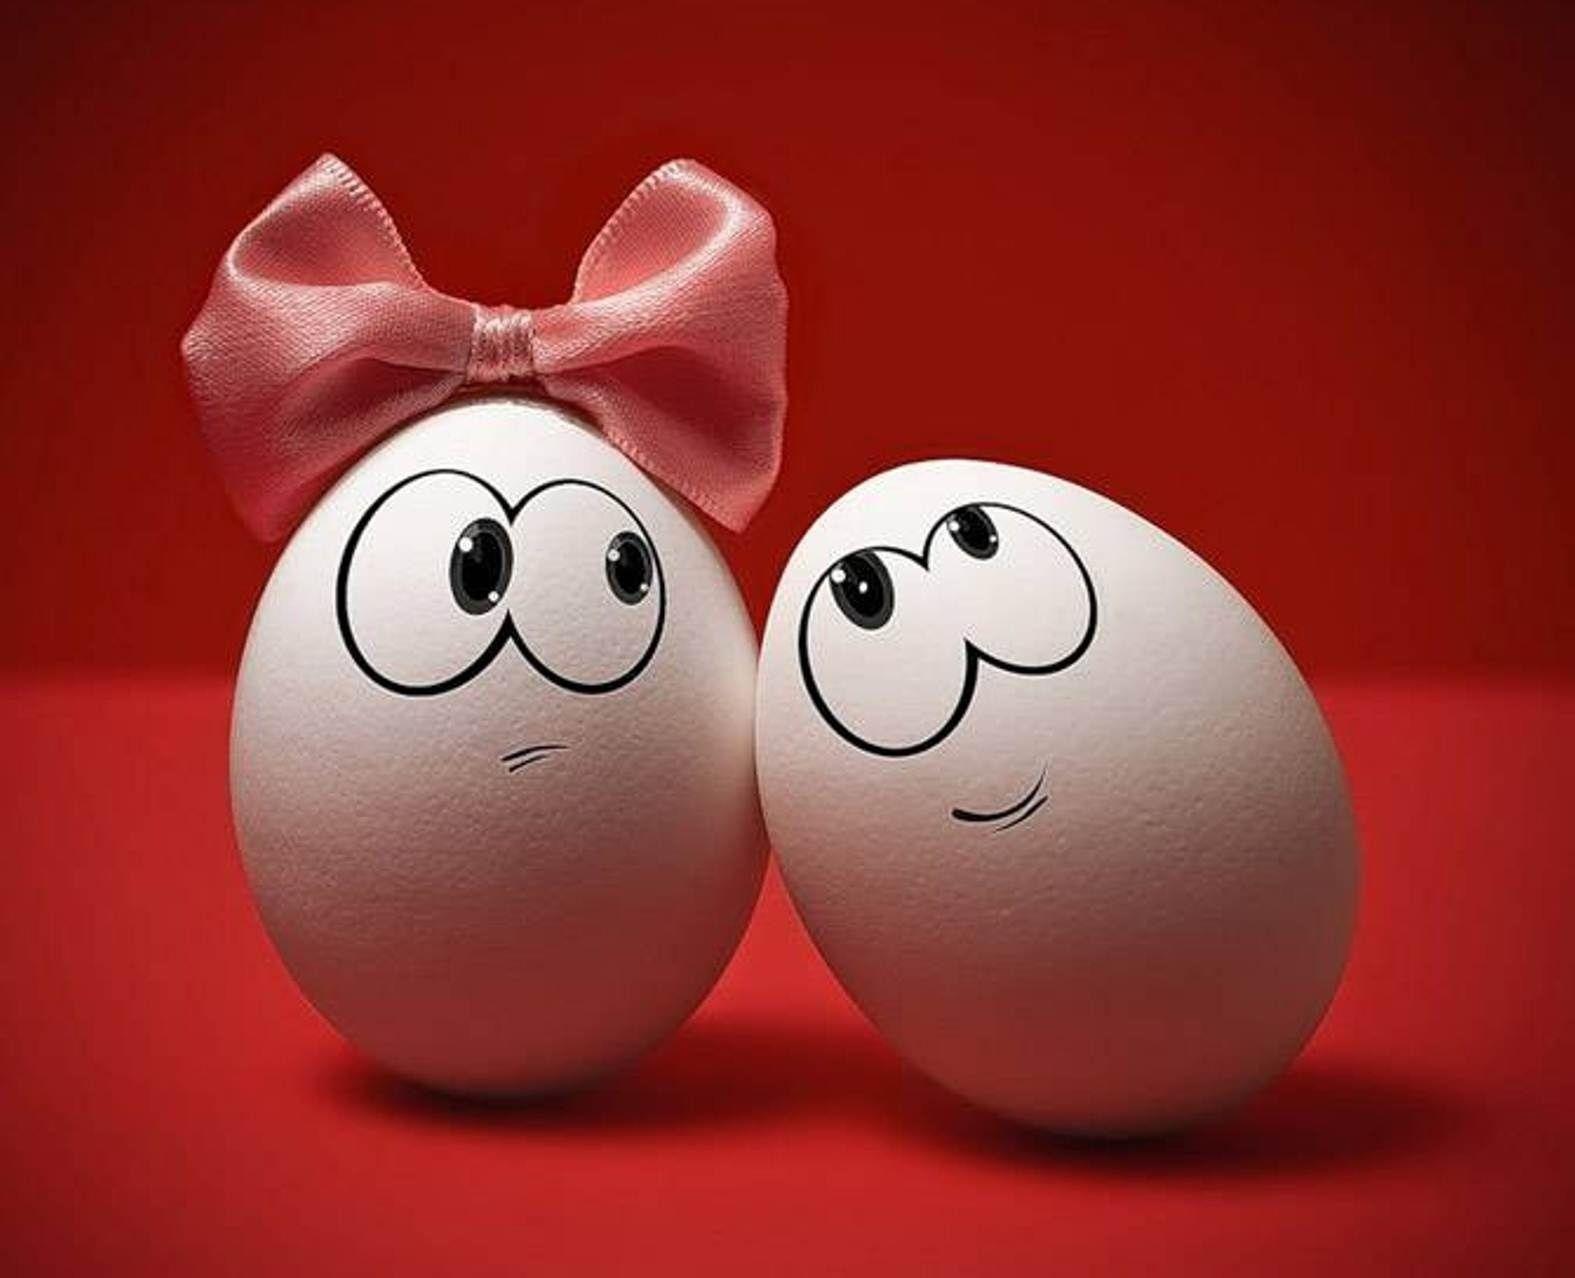 Download wallpaper 1575x1278 eggs, couple, bow, emotions HD background